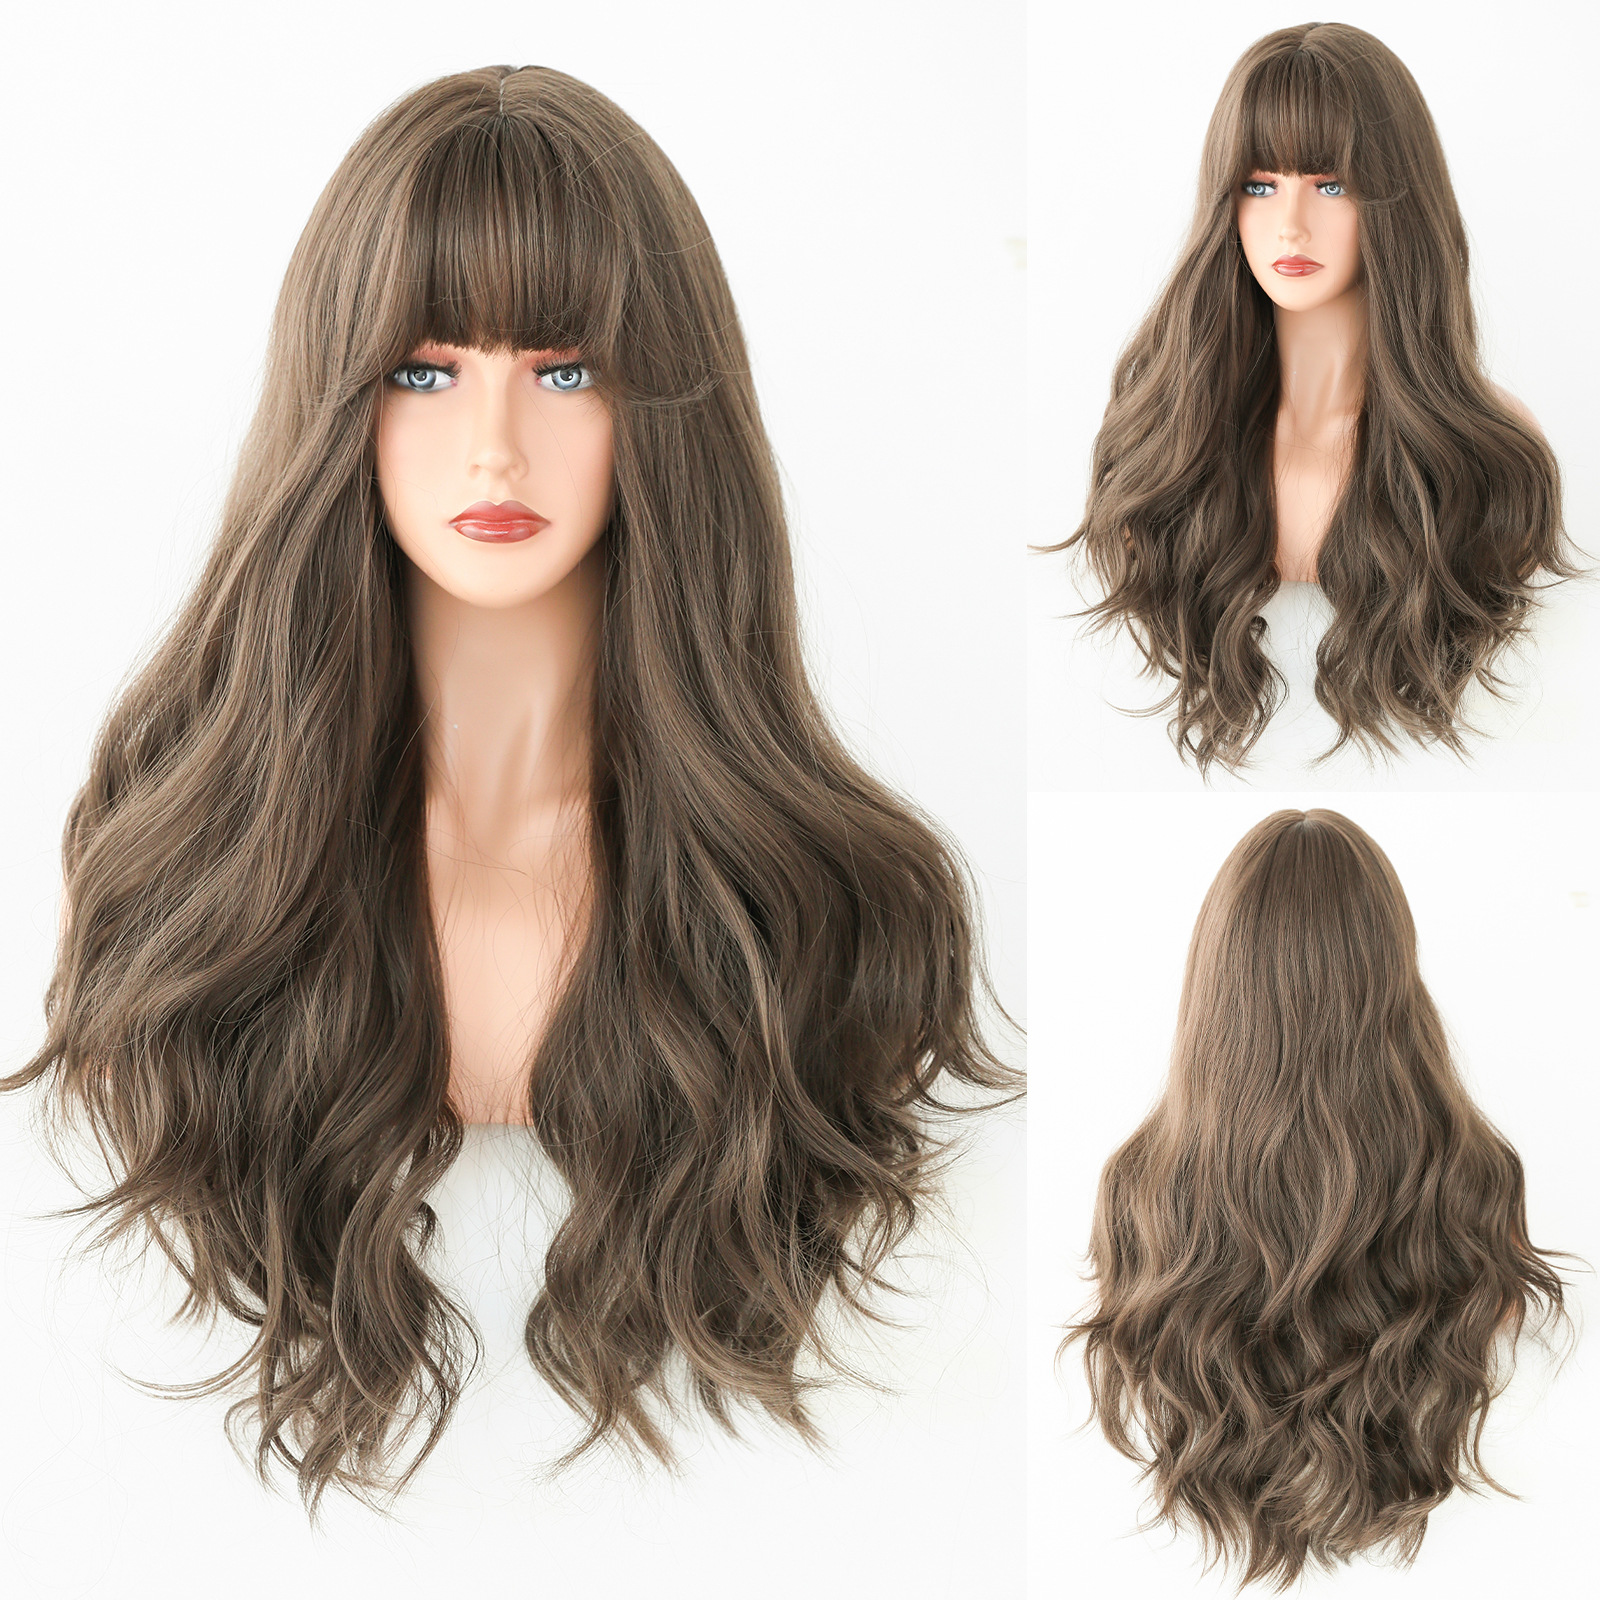 Trendy synthetic wig by Yinraohair in brown with headband gradient, featuring long curly hair and fashionable layered bangs, ready to go